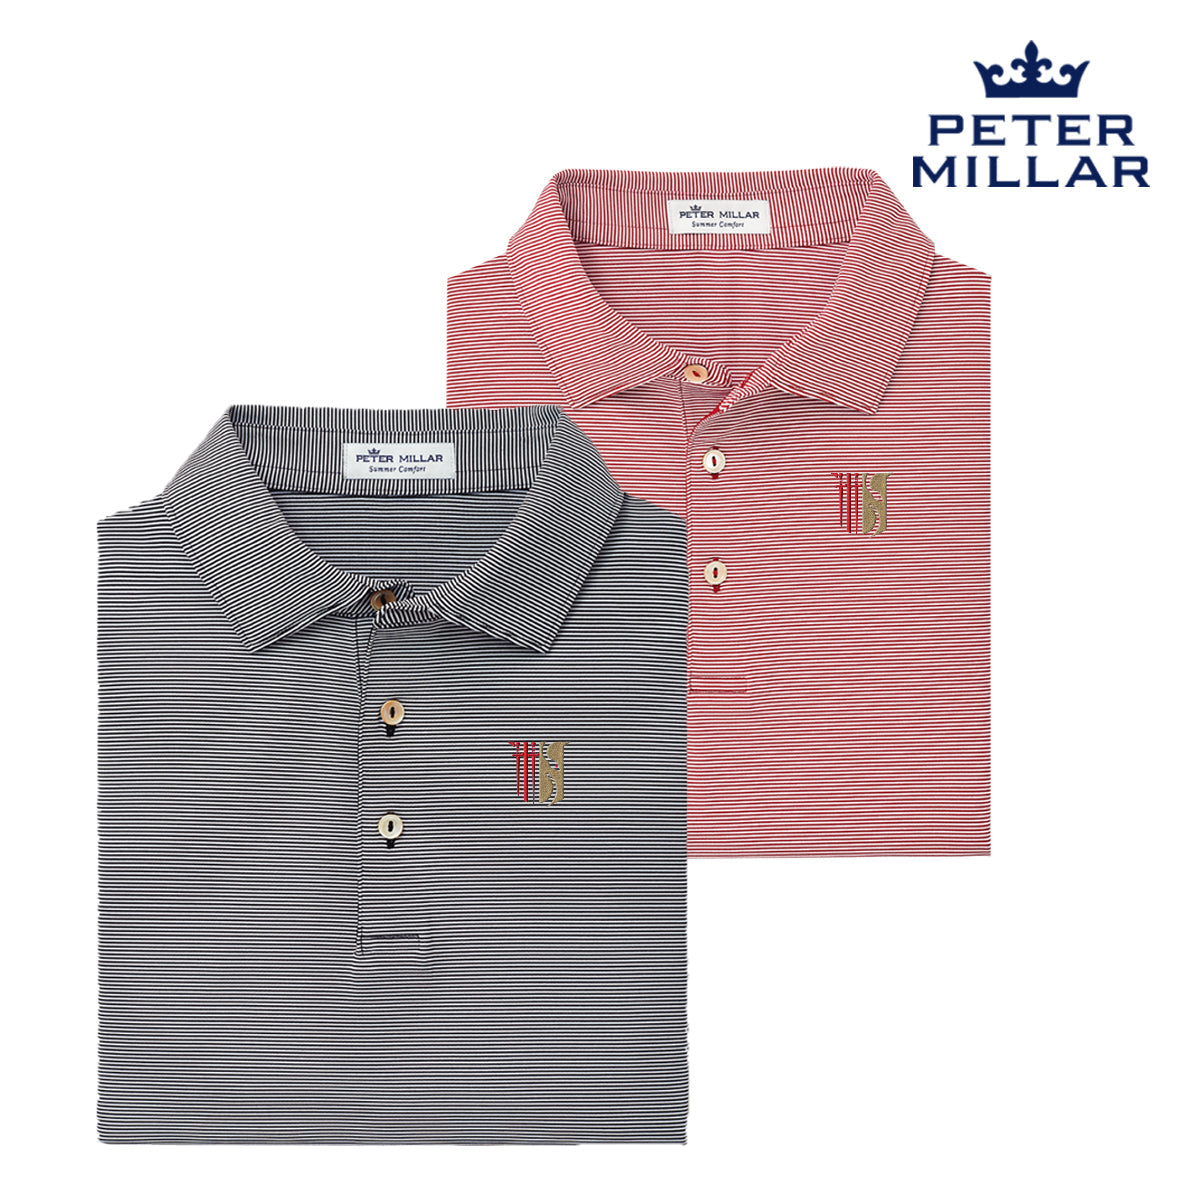 Theta Chi Peter Millar Jubilee Stripe Stretch Polo with Crest